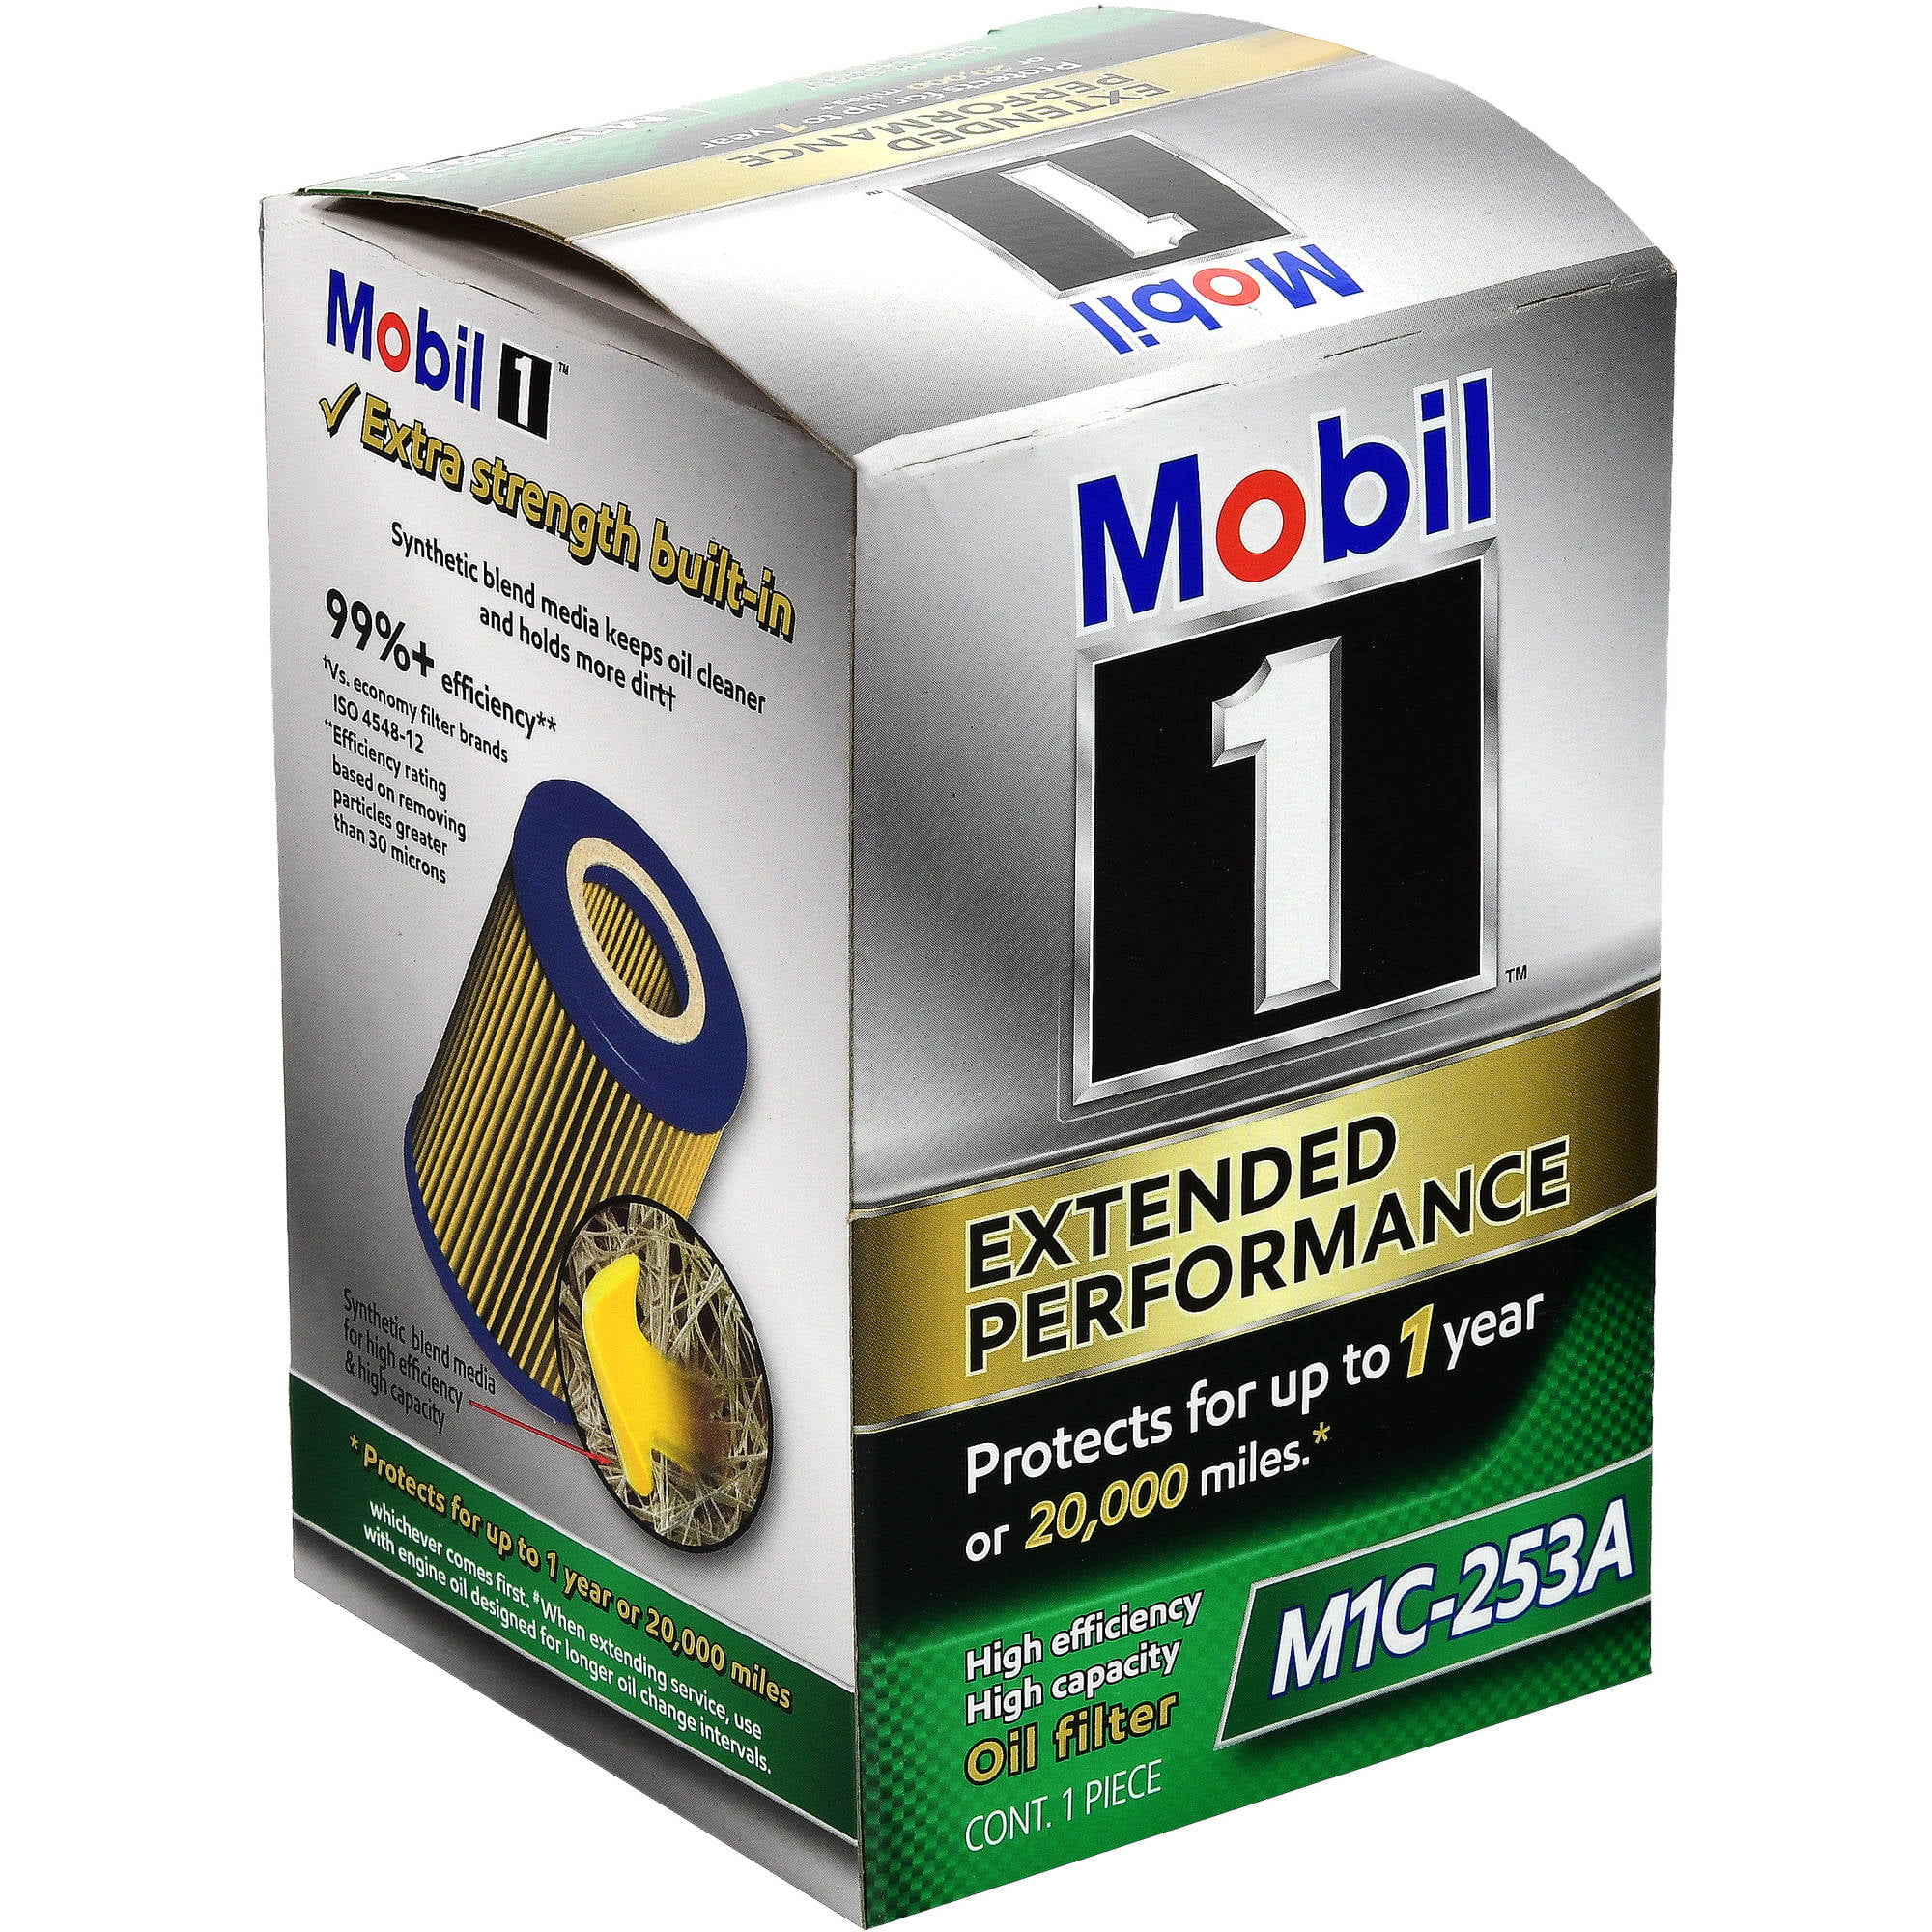 Are Mobil 1 Oil Filters Worth The Money